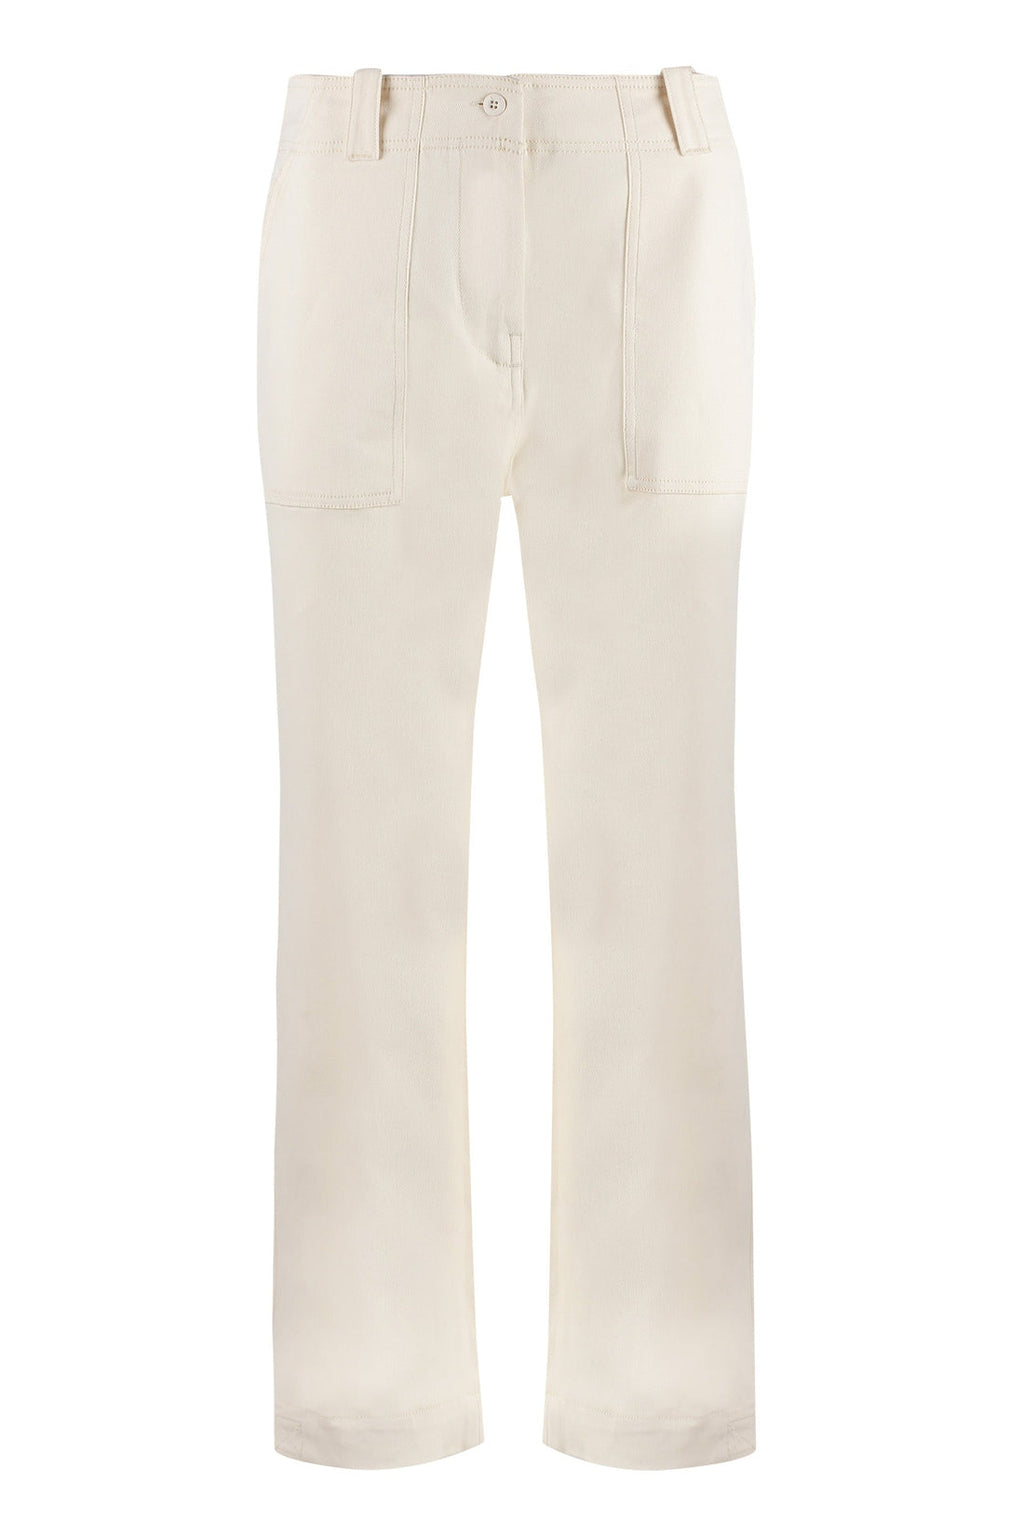 Weekend Max Mara-OUTLET-SALE-Eros stretch cotton trousers-ARCHIVIST